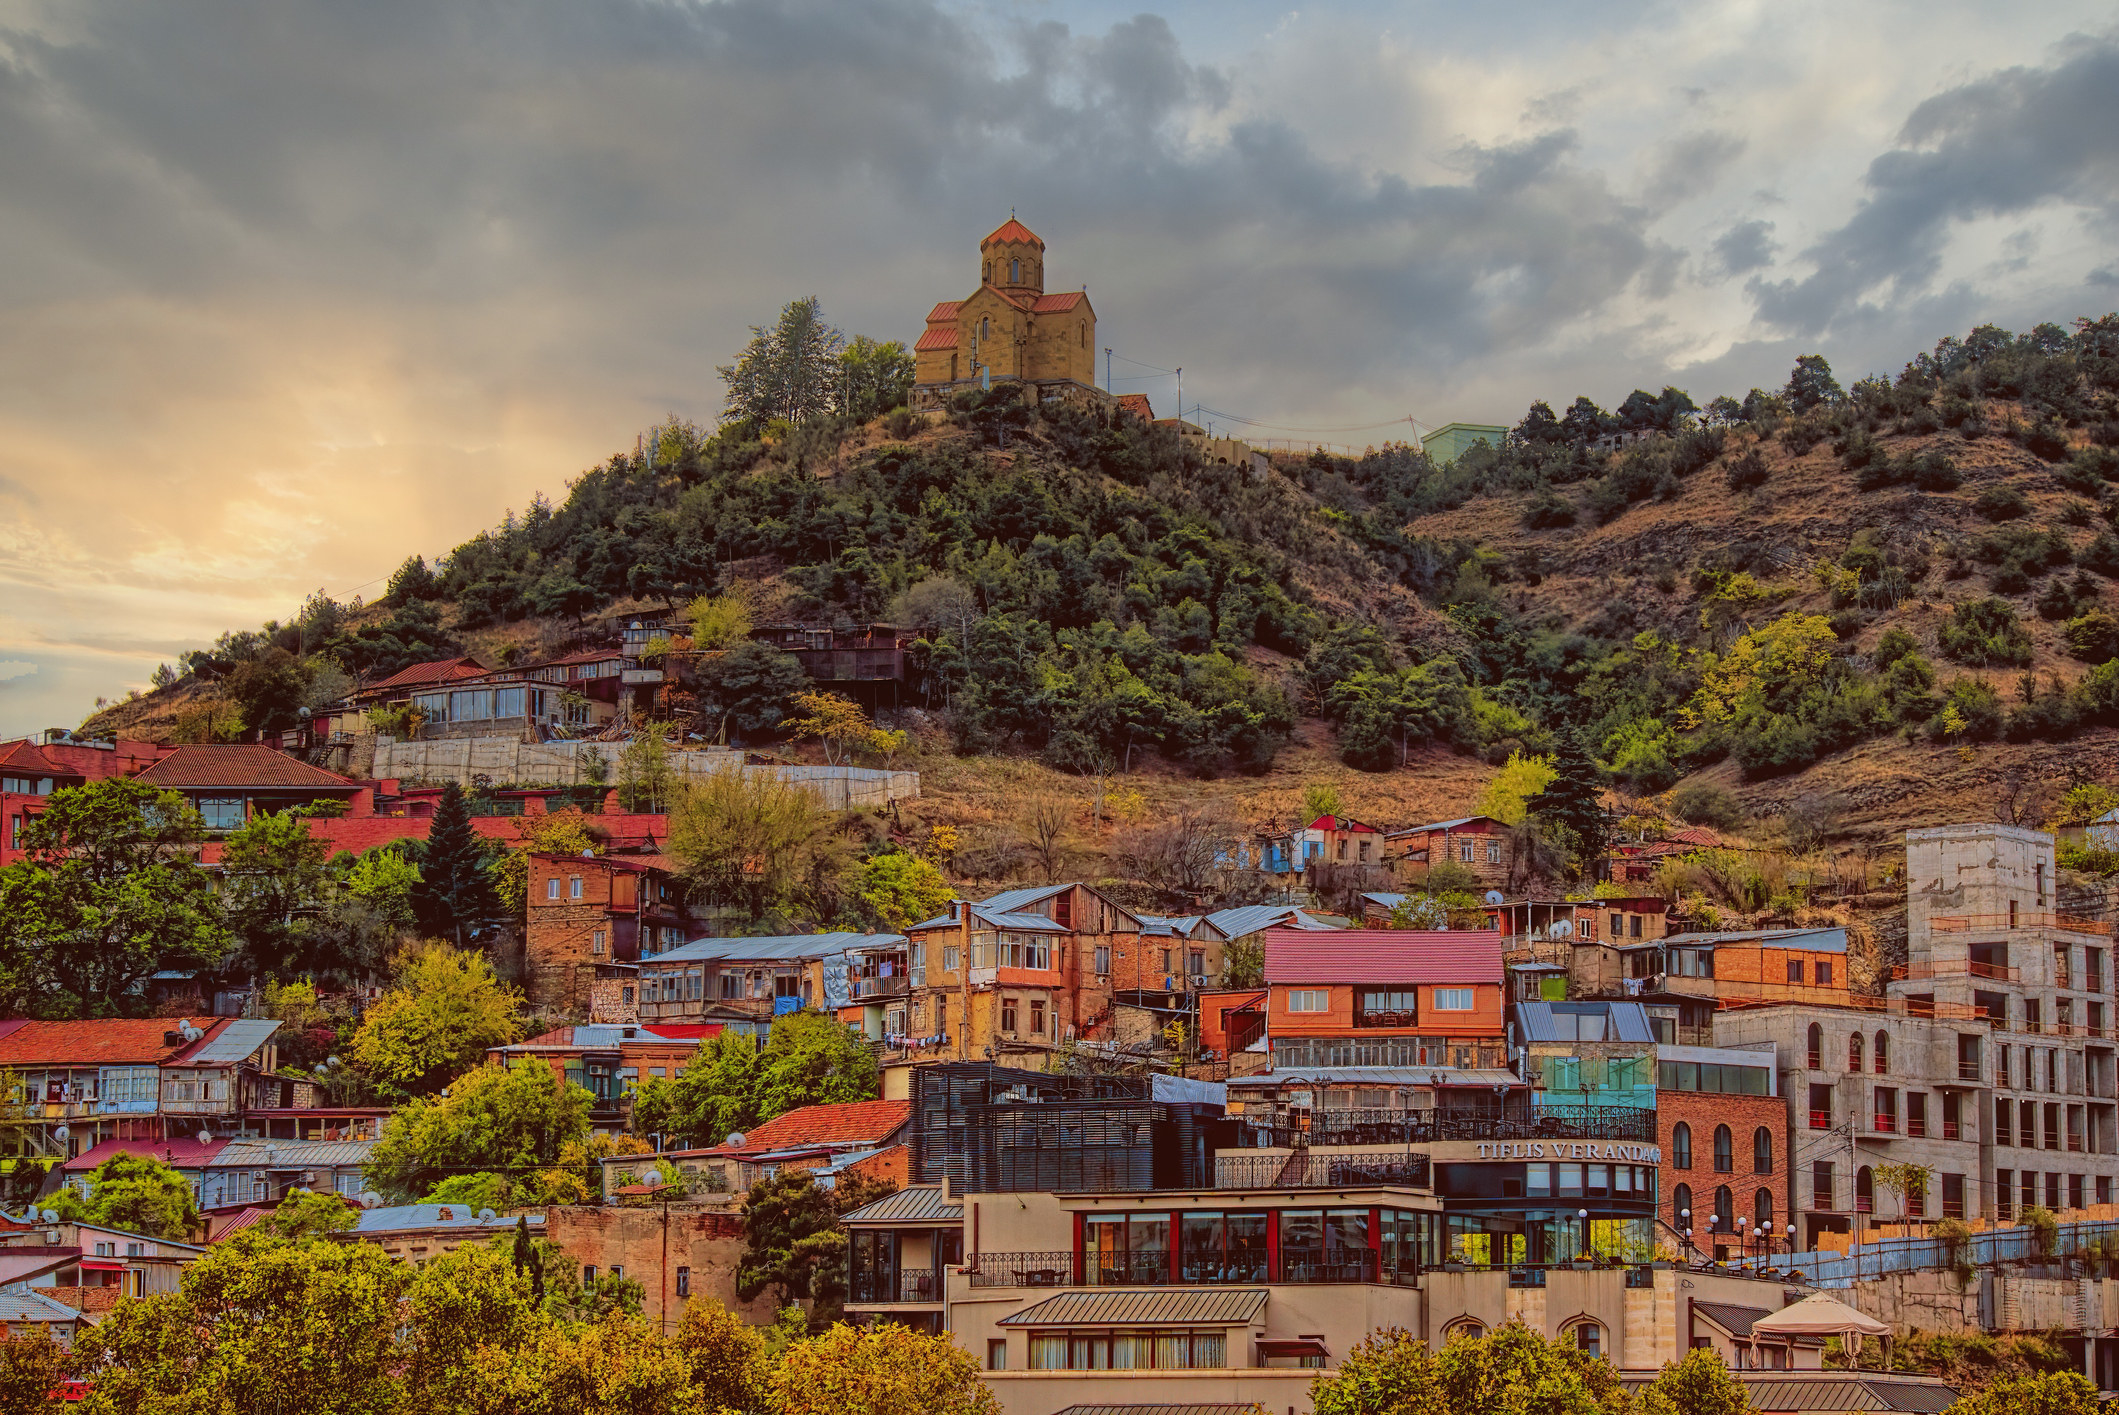 A church on a hill overlooking colorful buildings